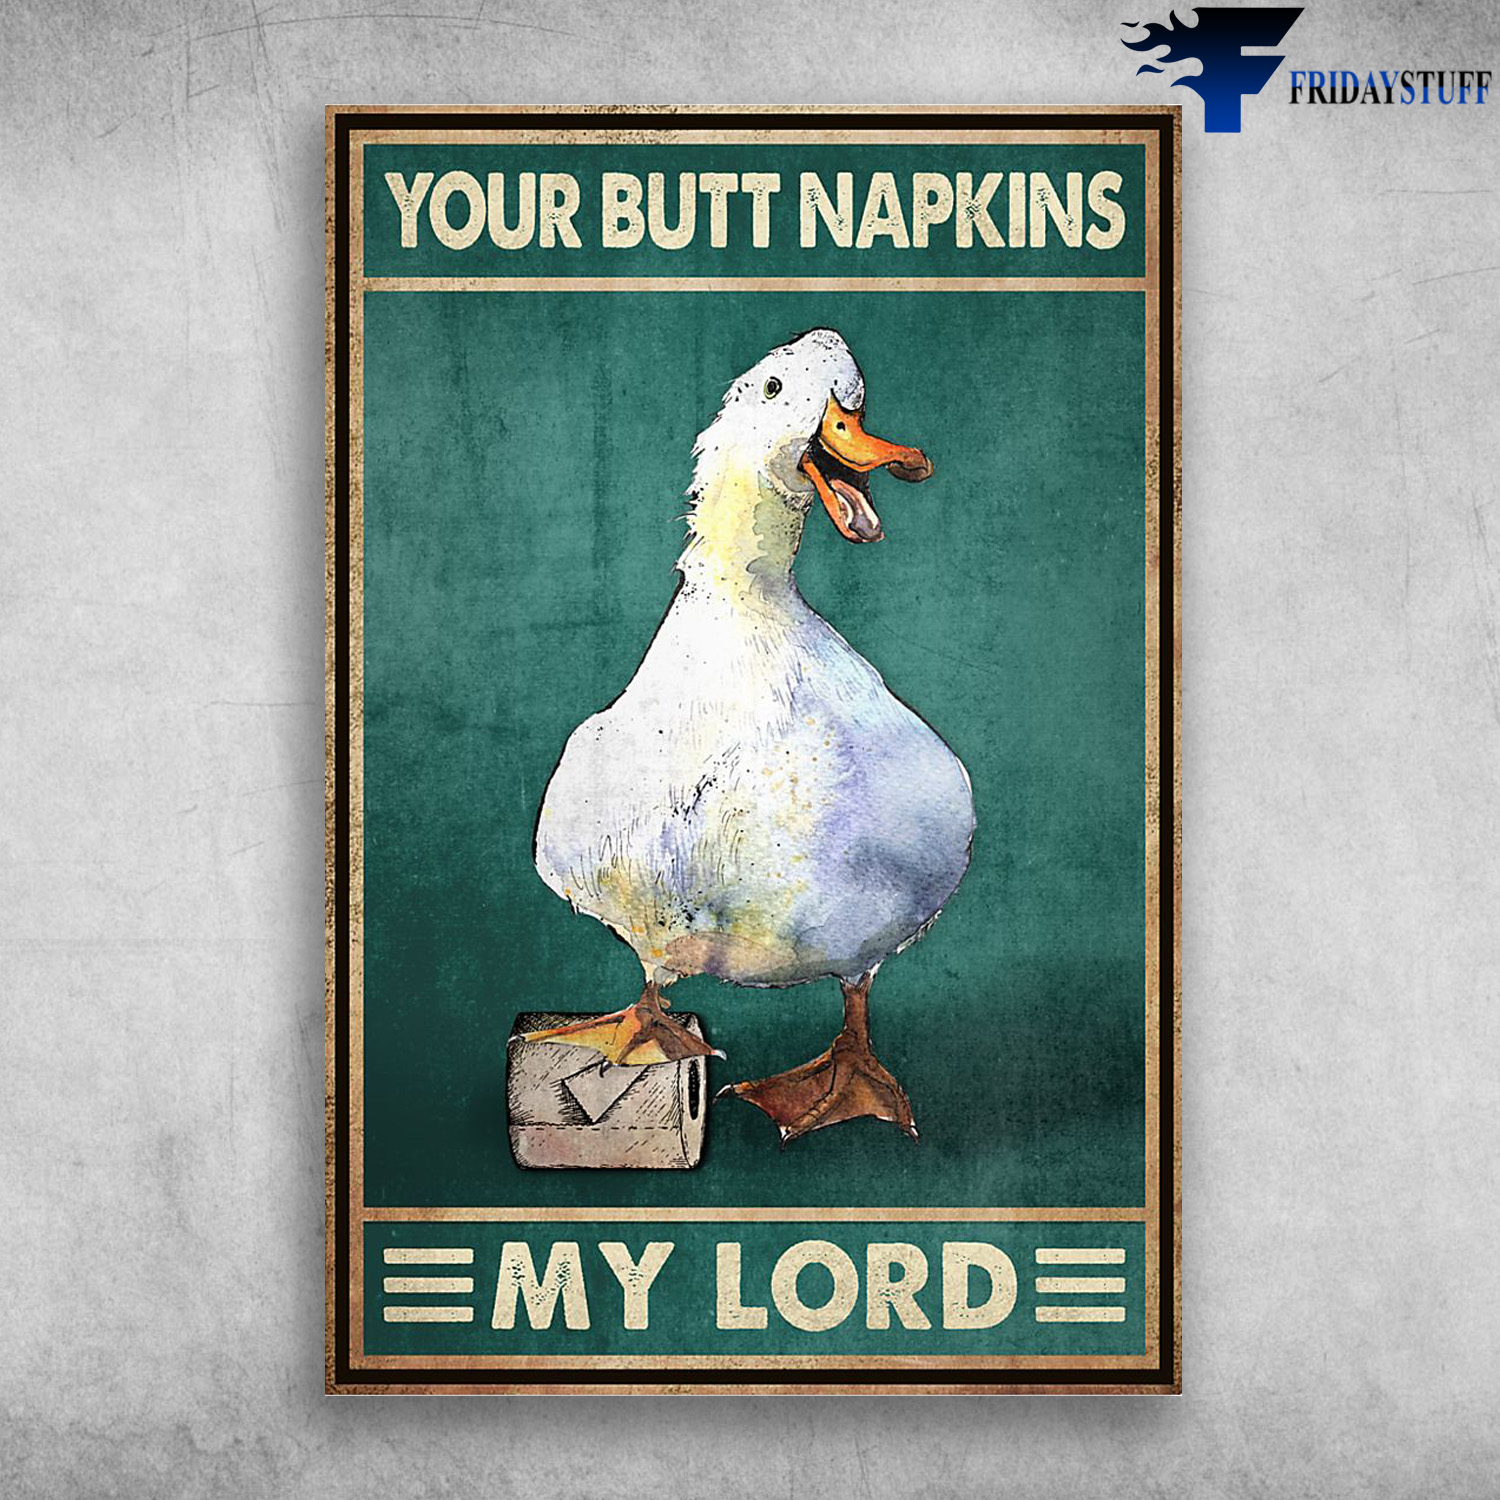 The Duck And Toilet Paper Roll - Your Butt Napkins, My Lord